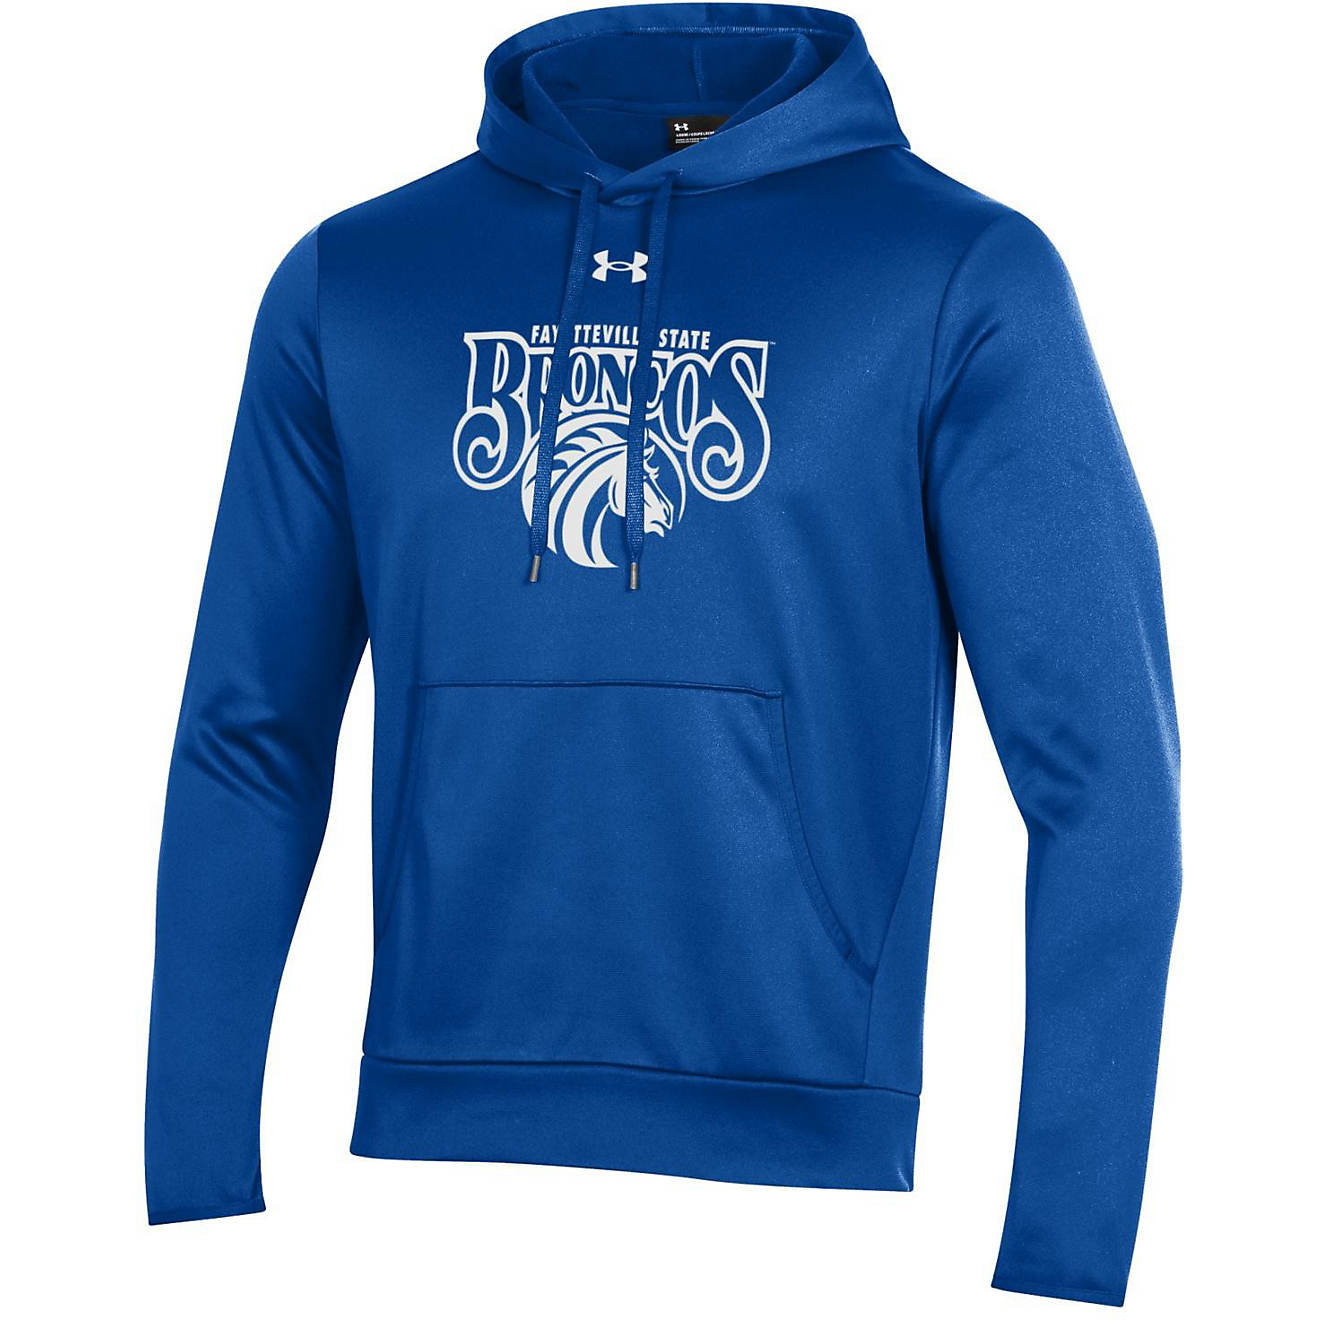 Under Armour Men's Fayetteville State University Mascot Hoodie                                                                   - view number 1